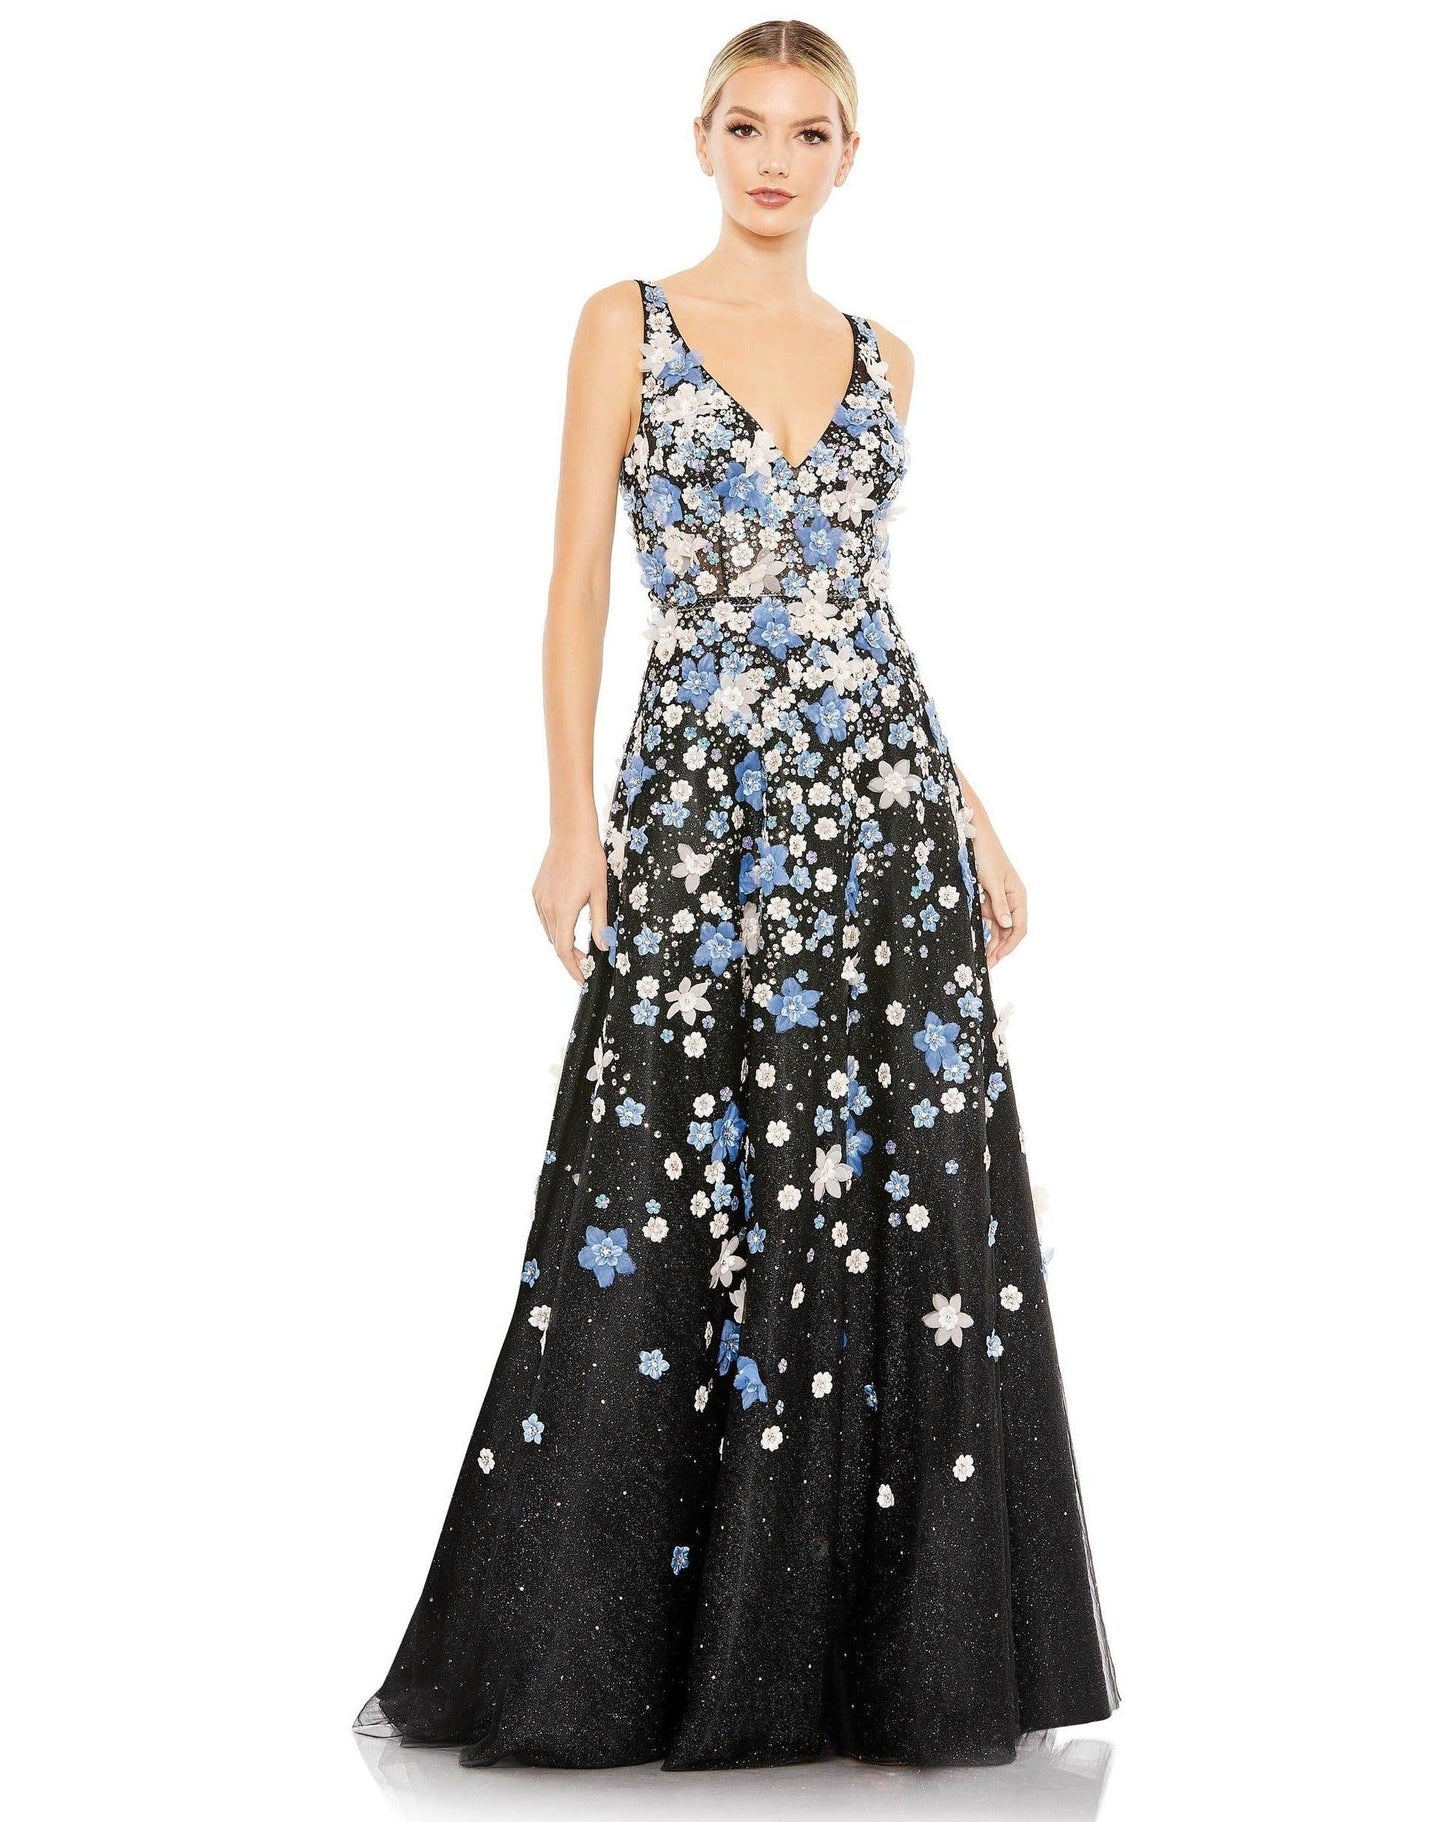 Mac Duggal Prom Long Sleeveless Floral Dress 11169 - The Dress Outlet